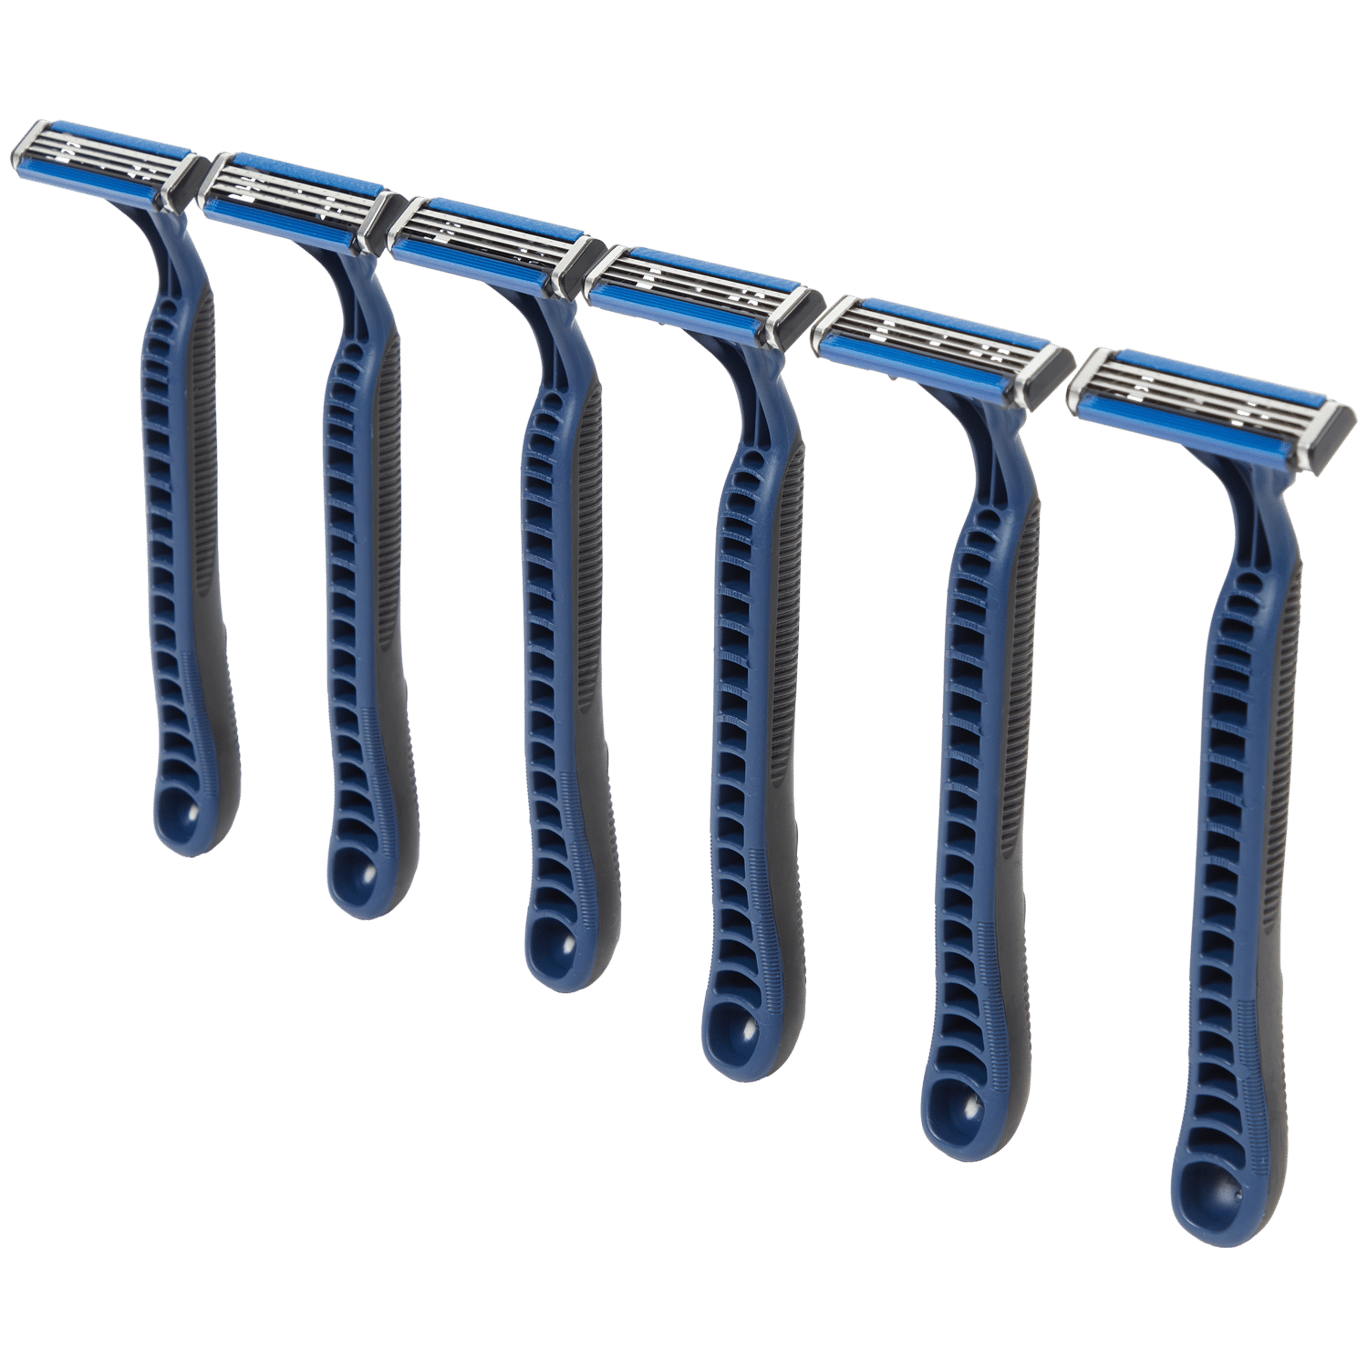 Rasoirs jetables Gillette Blue3 Smooth